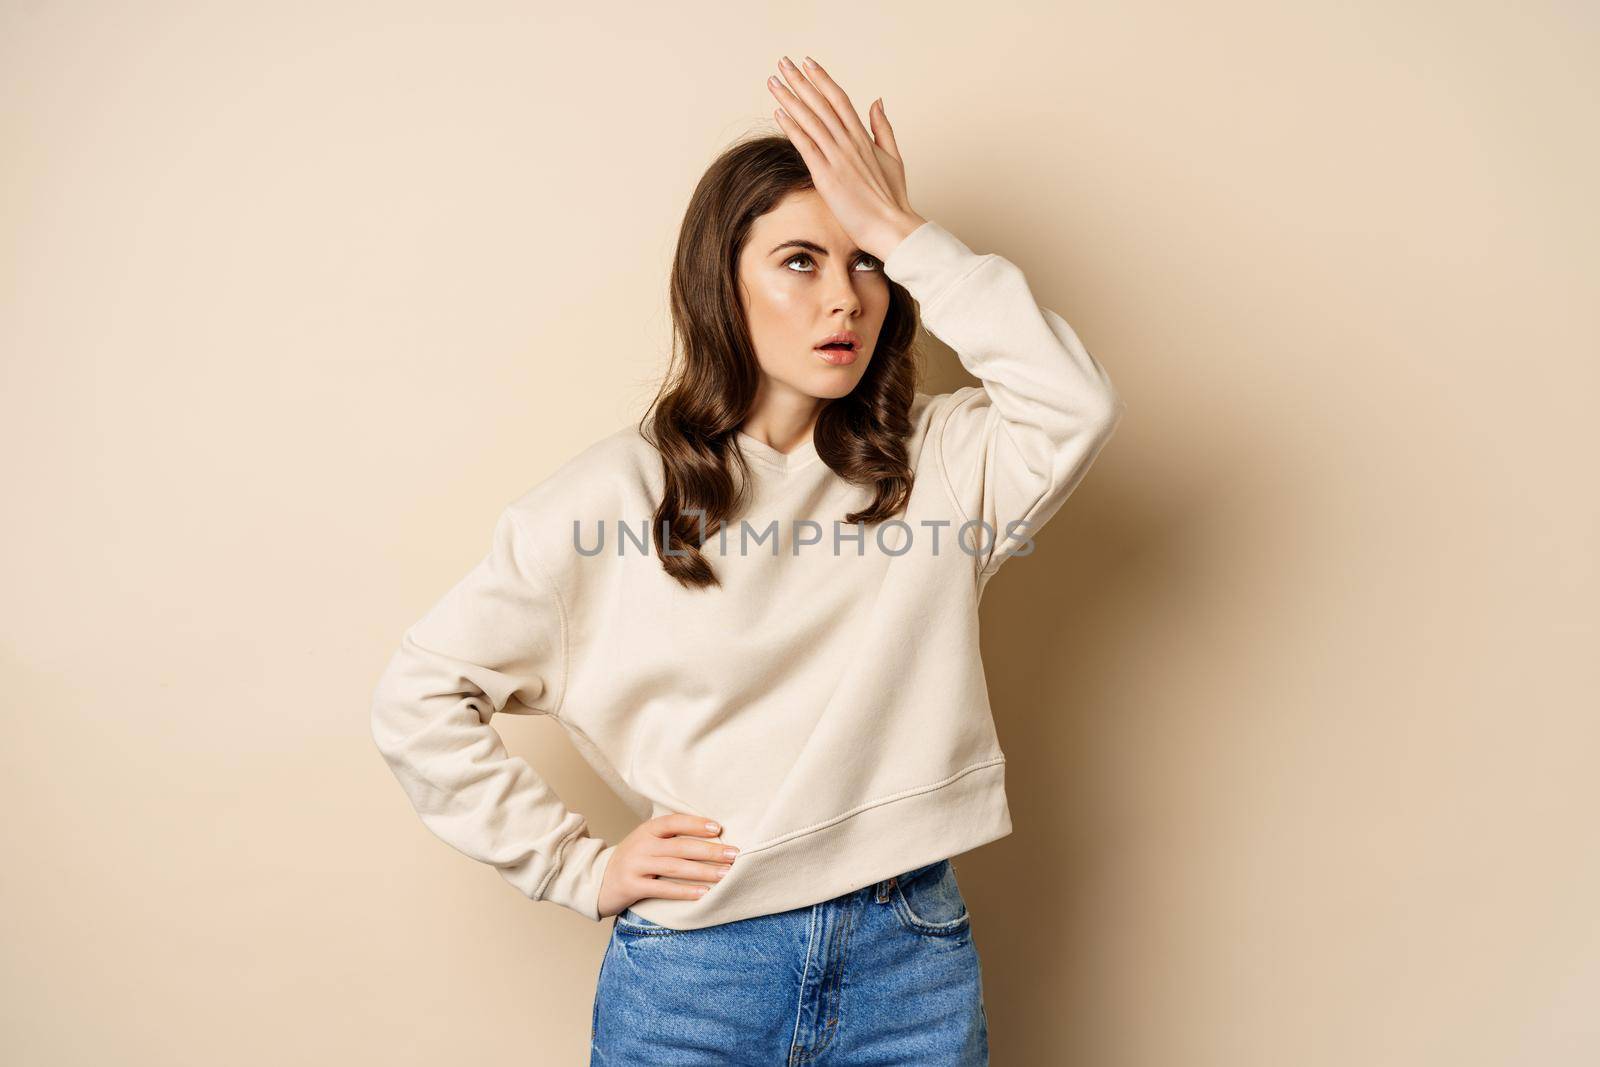 Annoyed woman facepalm, roll eyes irritated, bothered by smth stupid, standing over beige background.